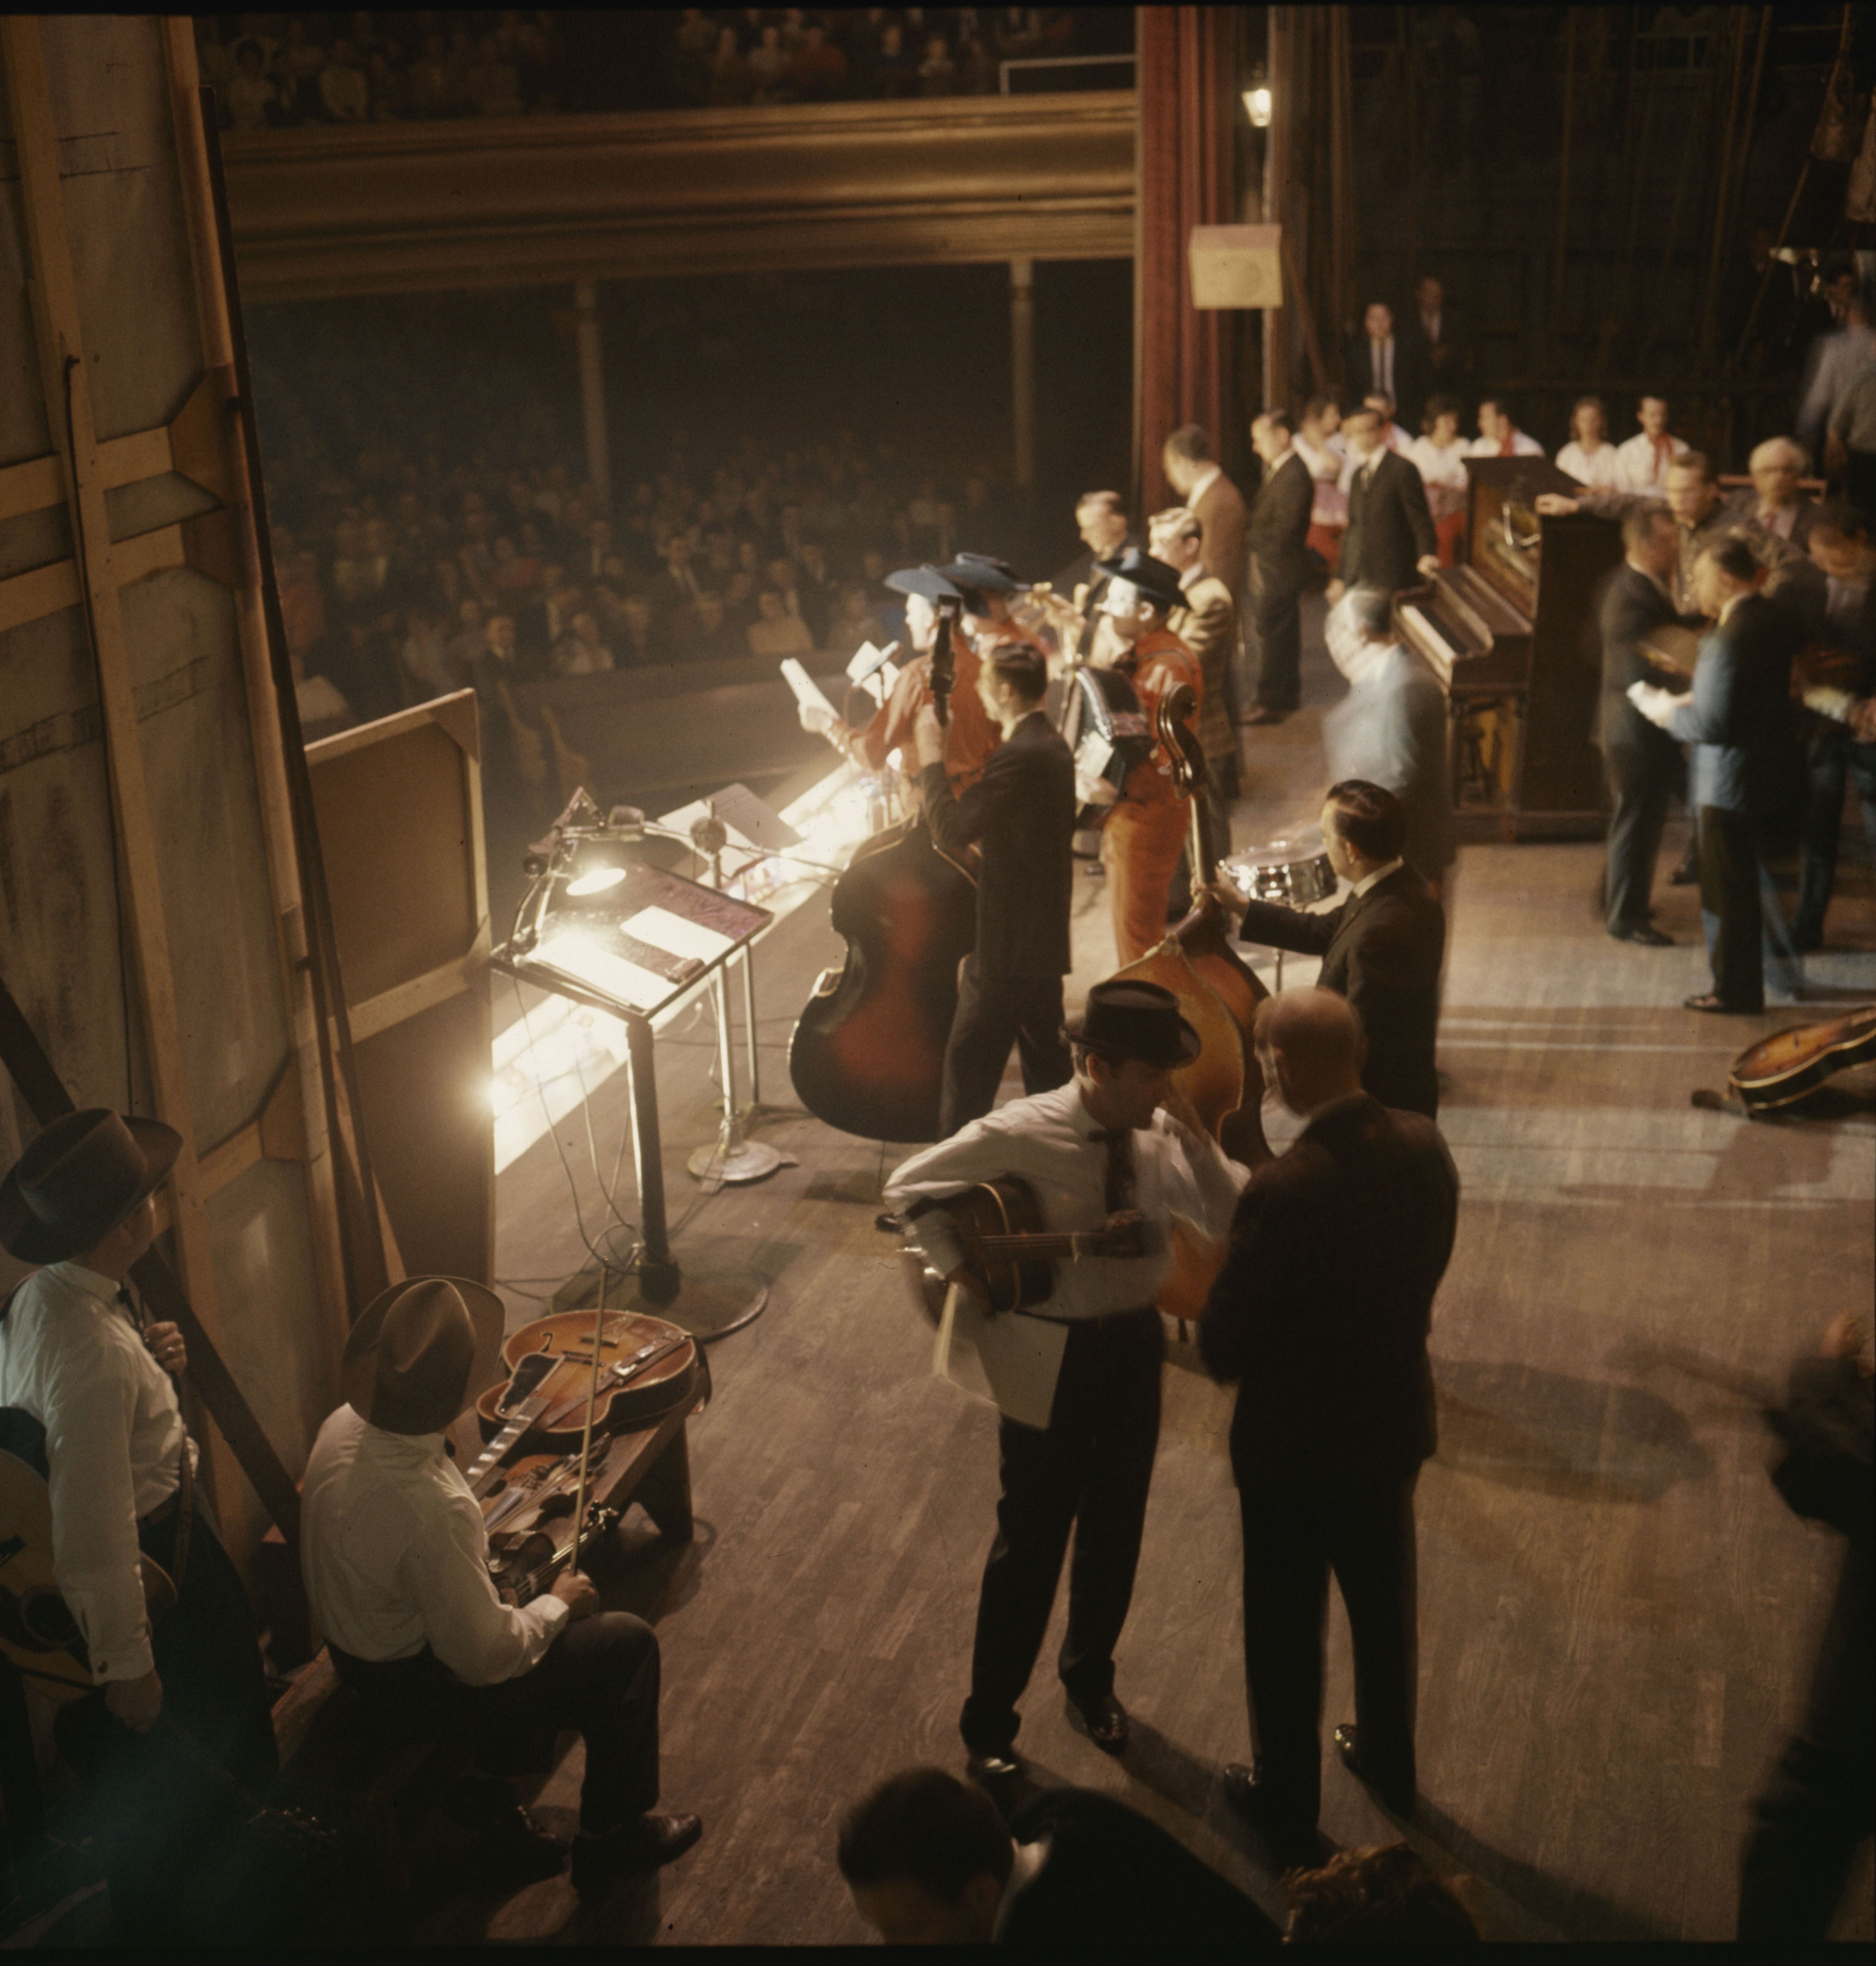 The Grand Ole Opry at the Ryman Auditorium, Nashville in 1960